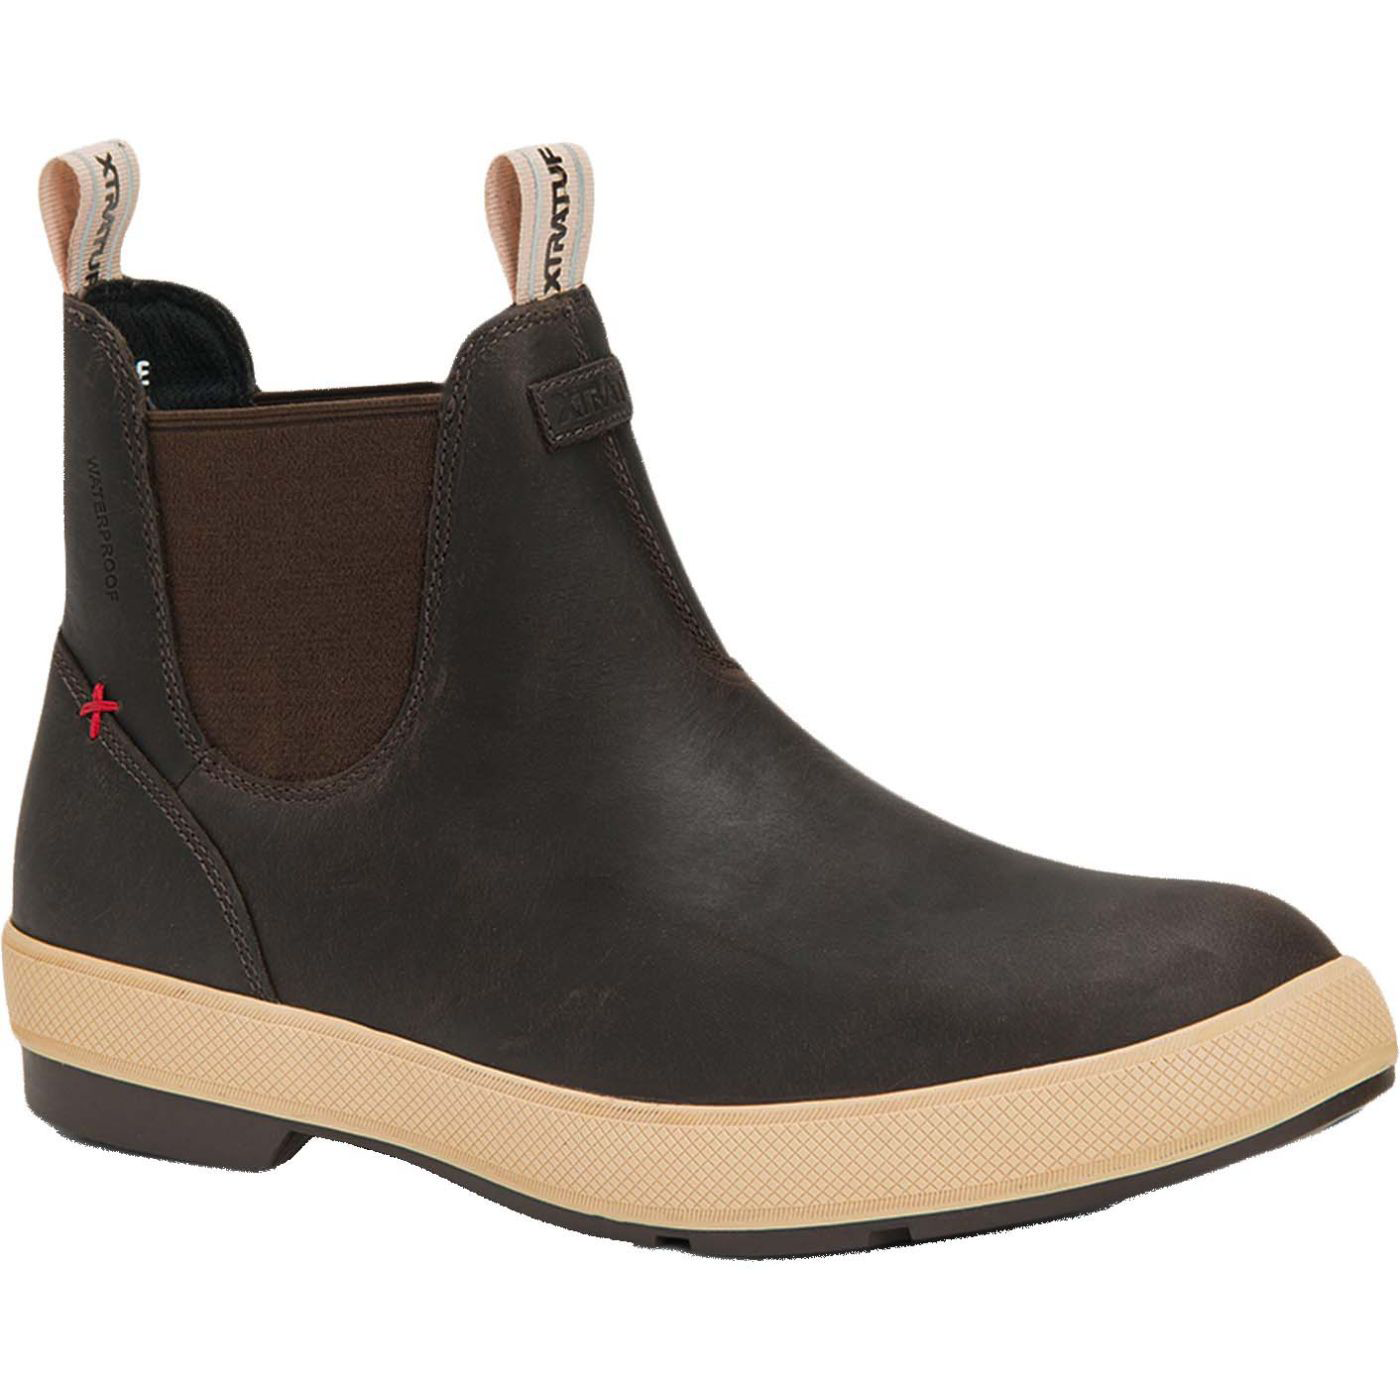 Xtratuf Legacy Leather Chelsea Boots for Men - Brown - 14M